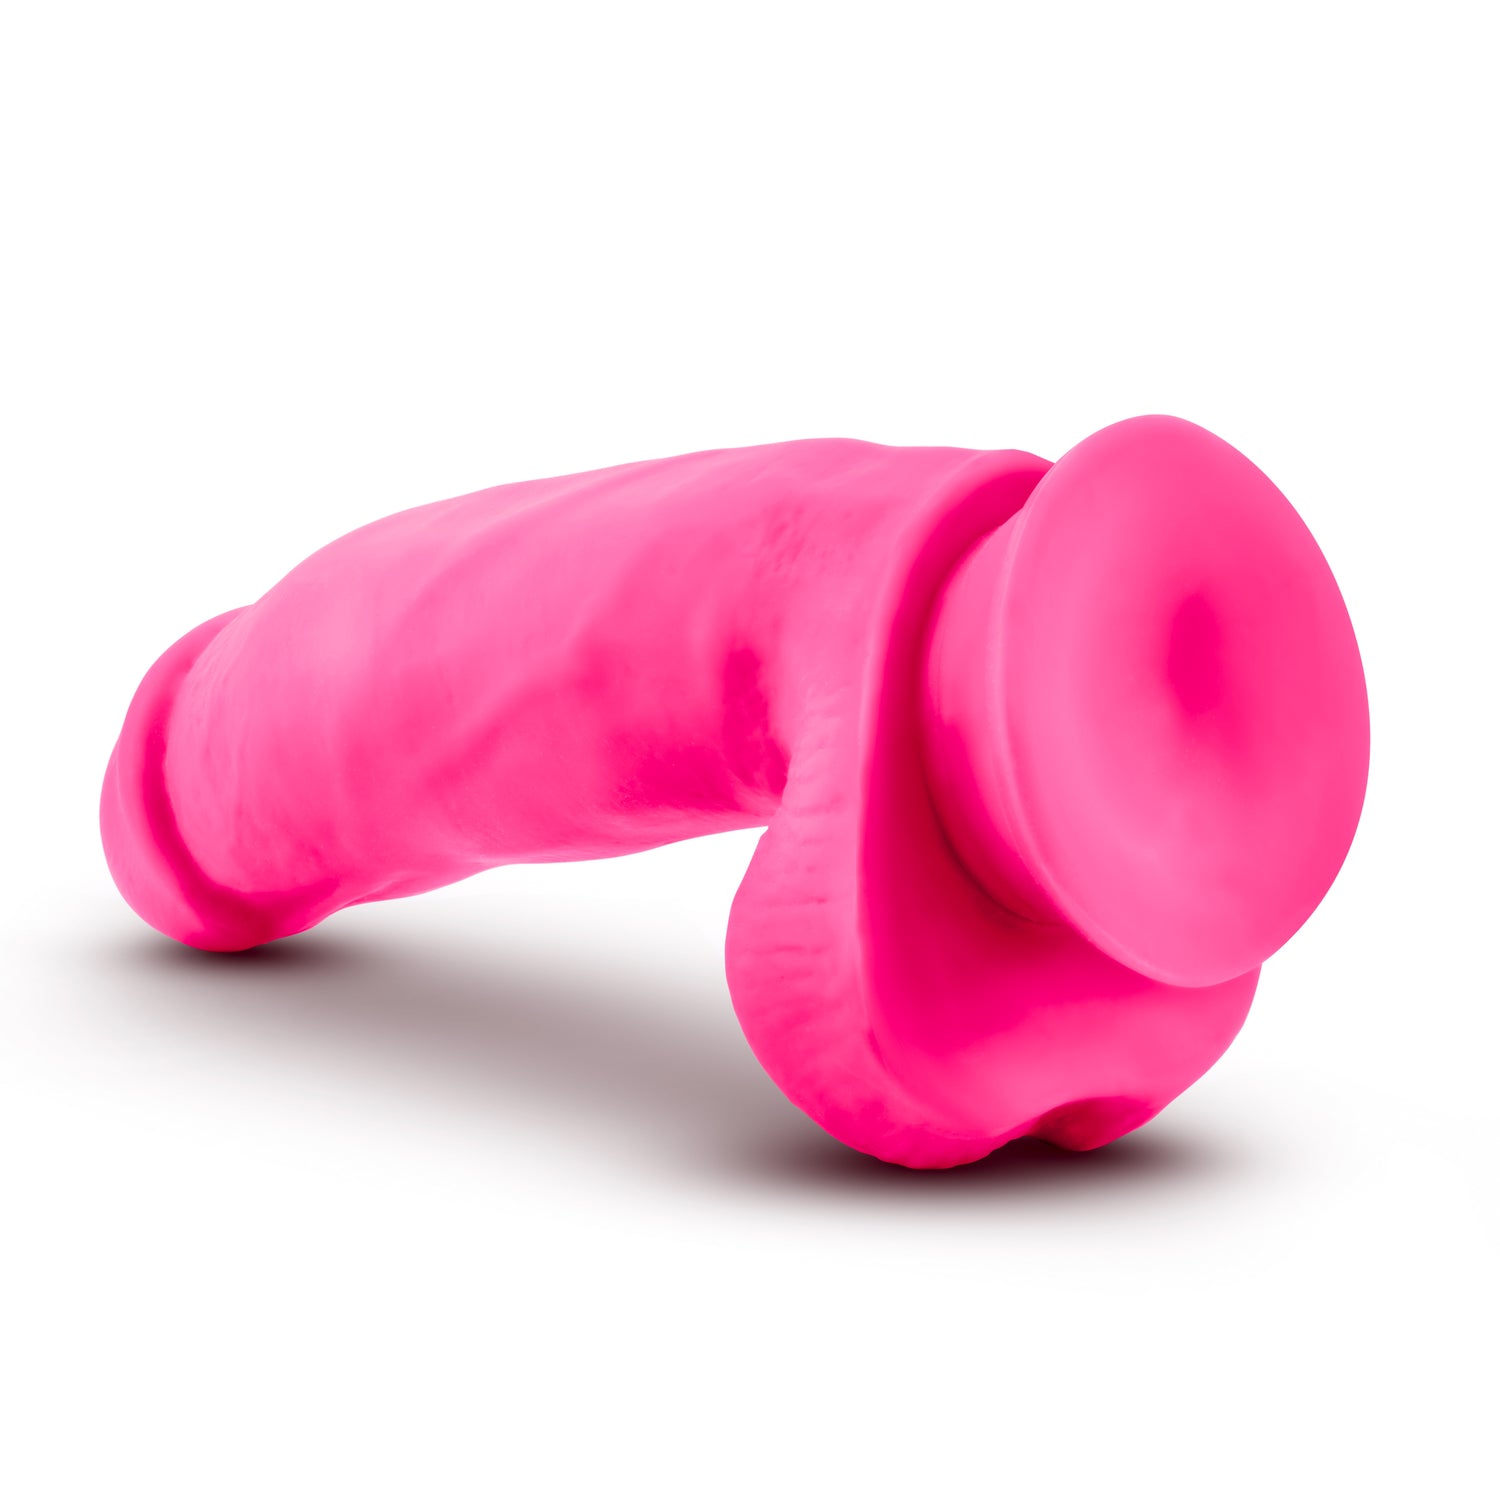 Neo Elite 7in Silicone Dual Density Cock with Balls Neon Pink - Just for you desires